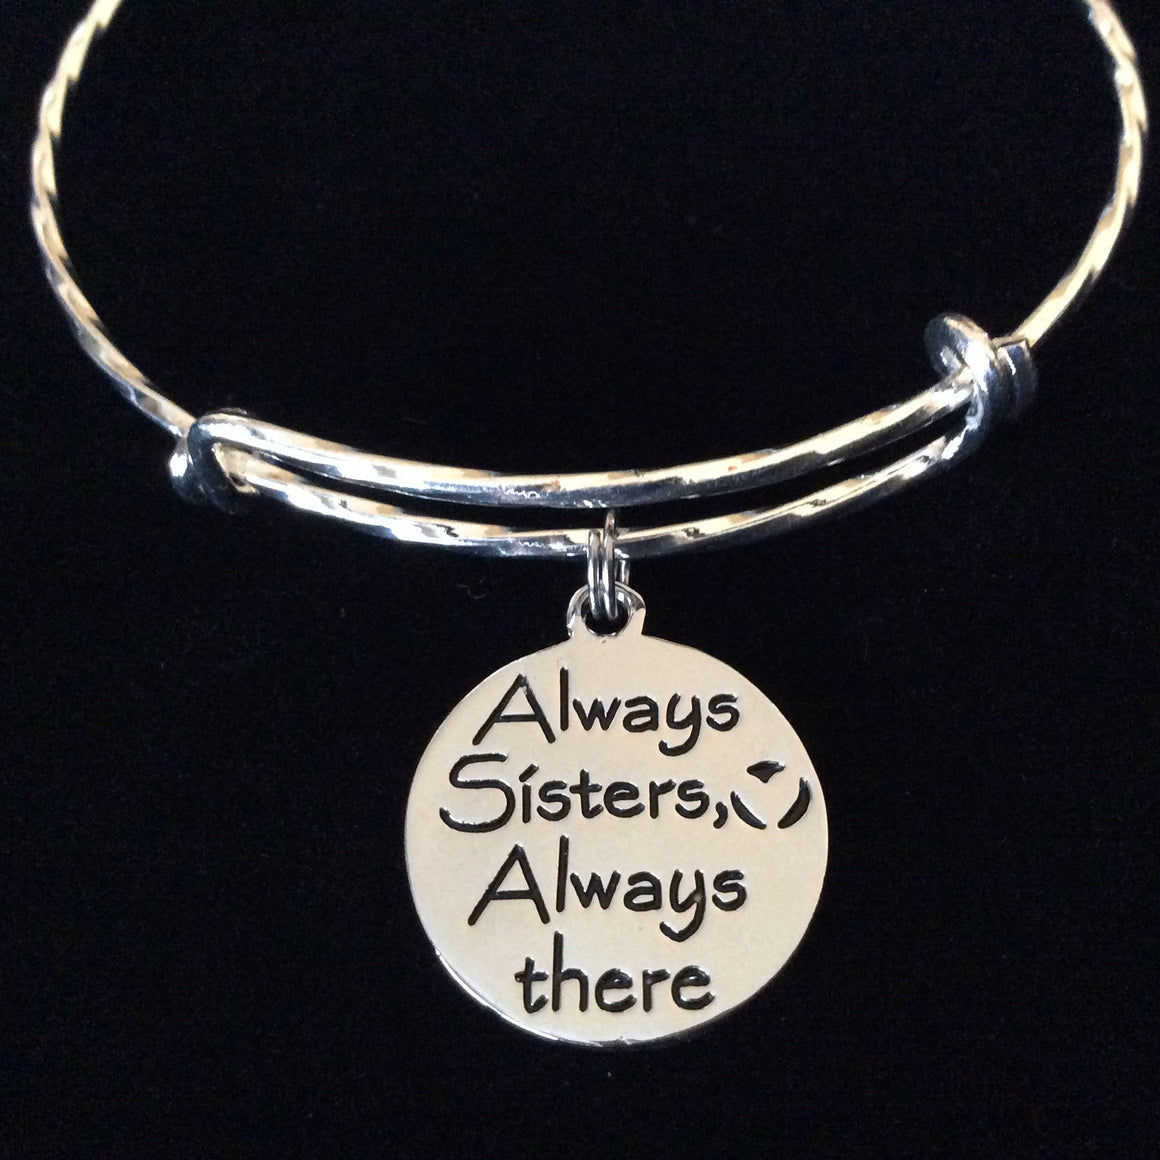 Always Sisters Always There Expandable Silver Charm Bracelet Adjustable Bangle Family Gift